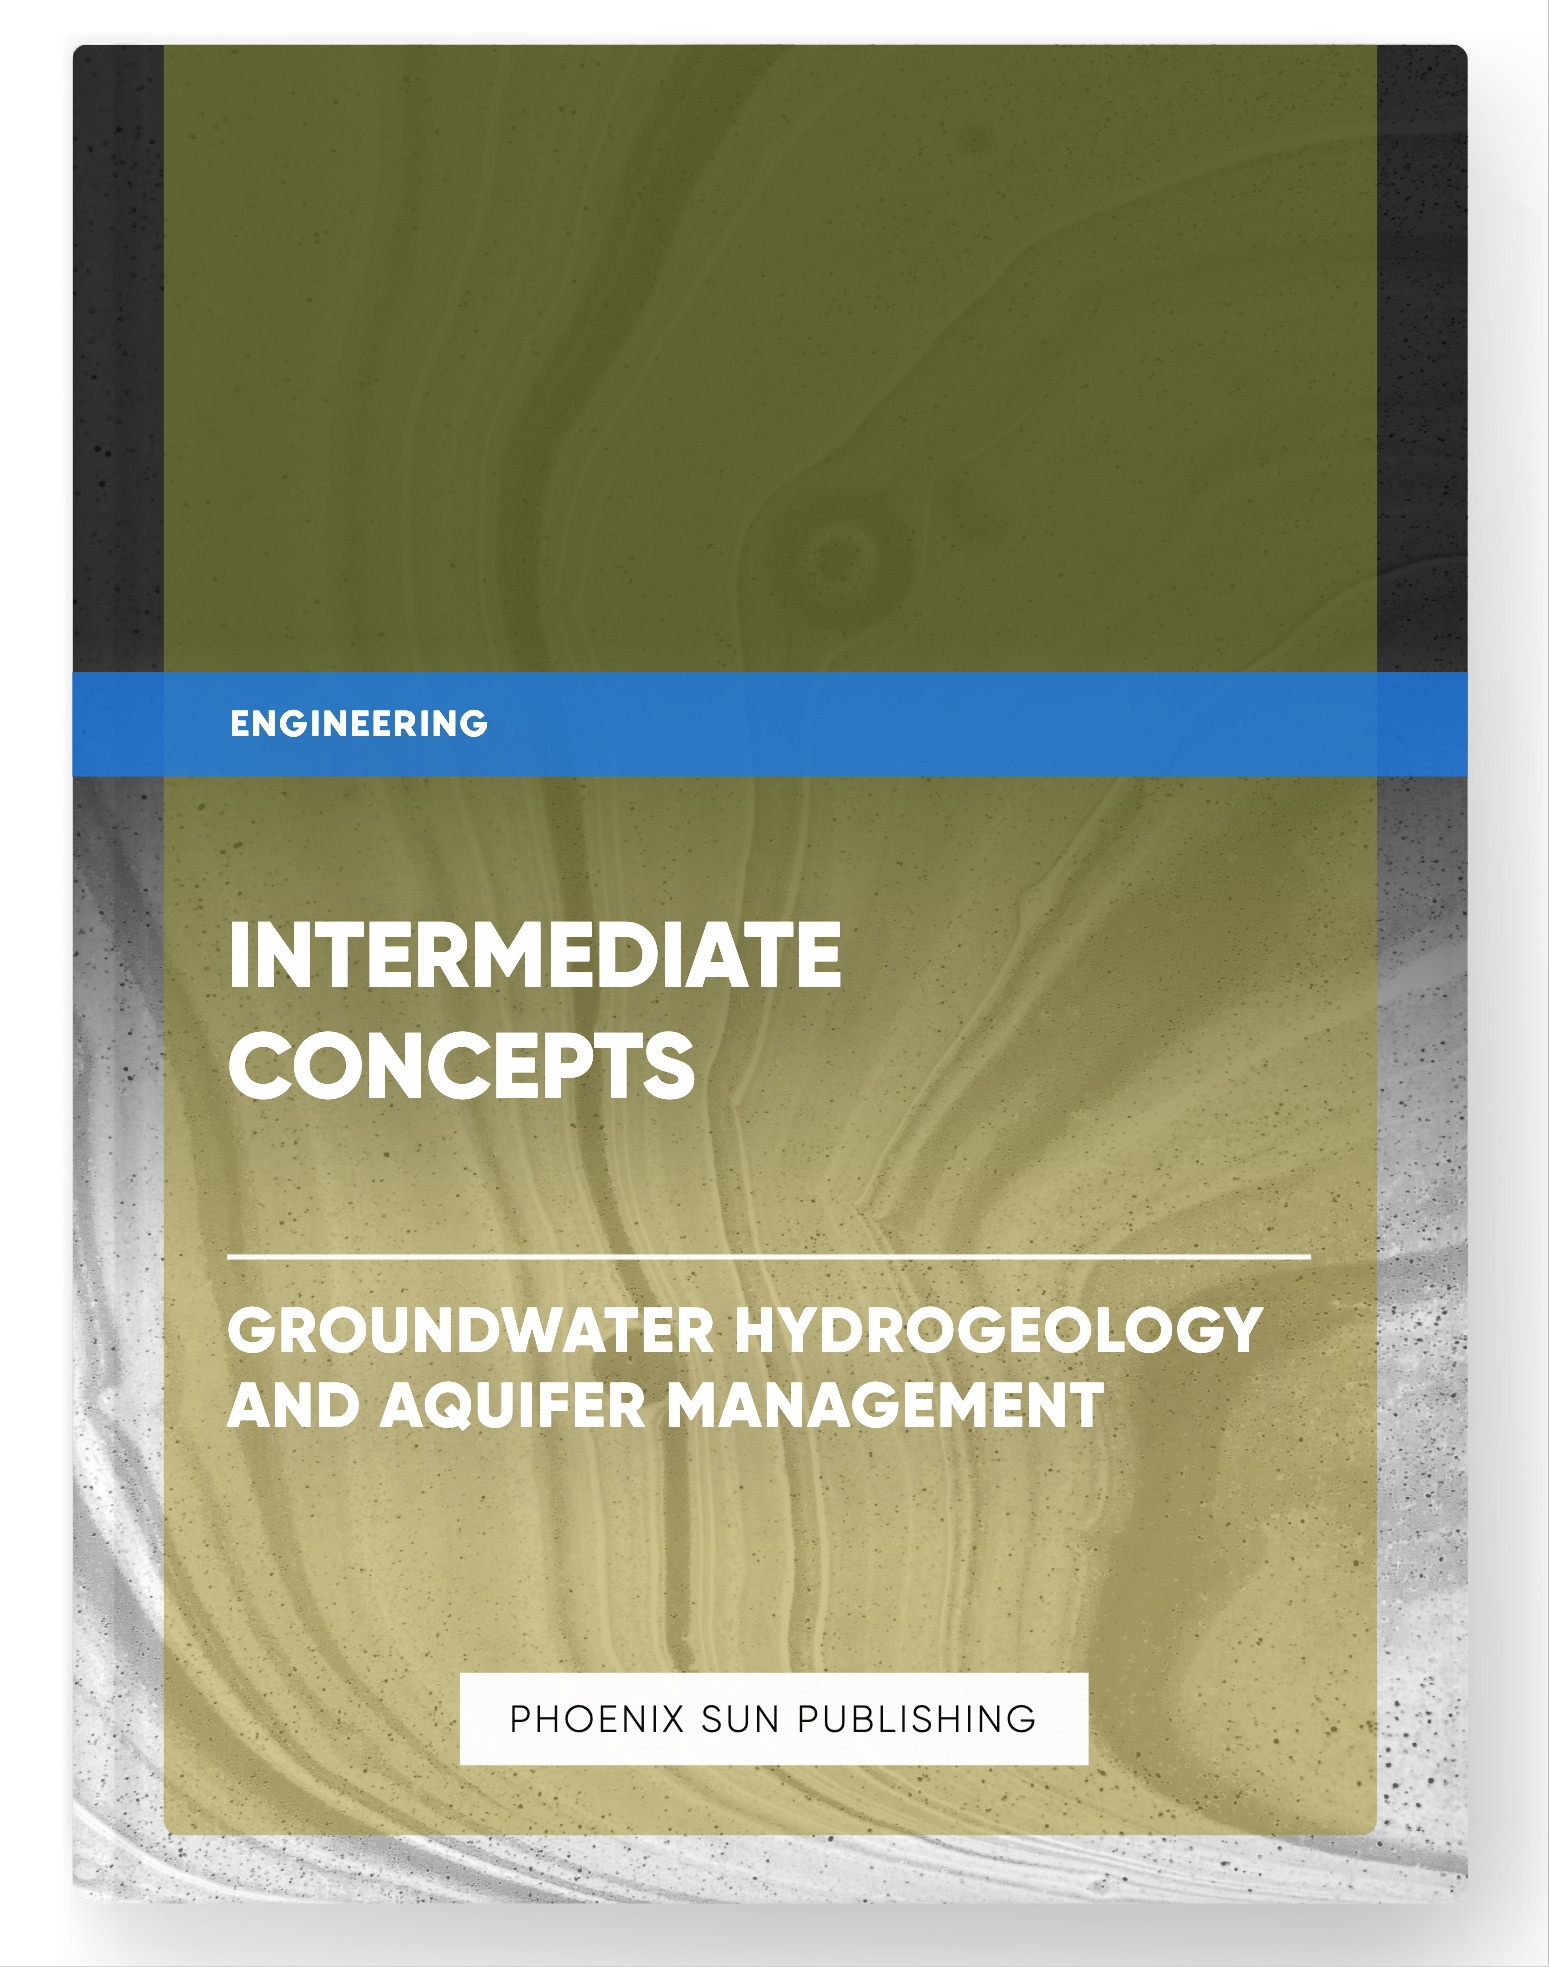 Intermediate Concepts – Groundwater Hydrogeology and Aquifer Management